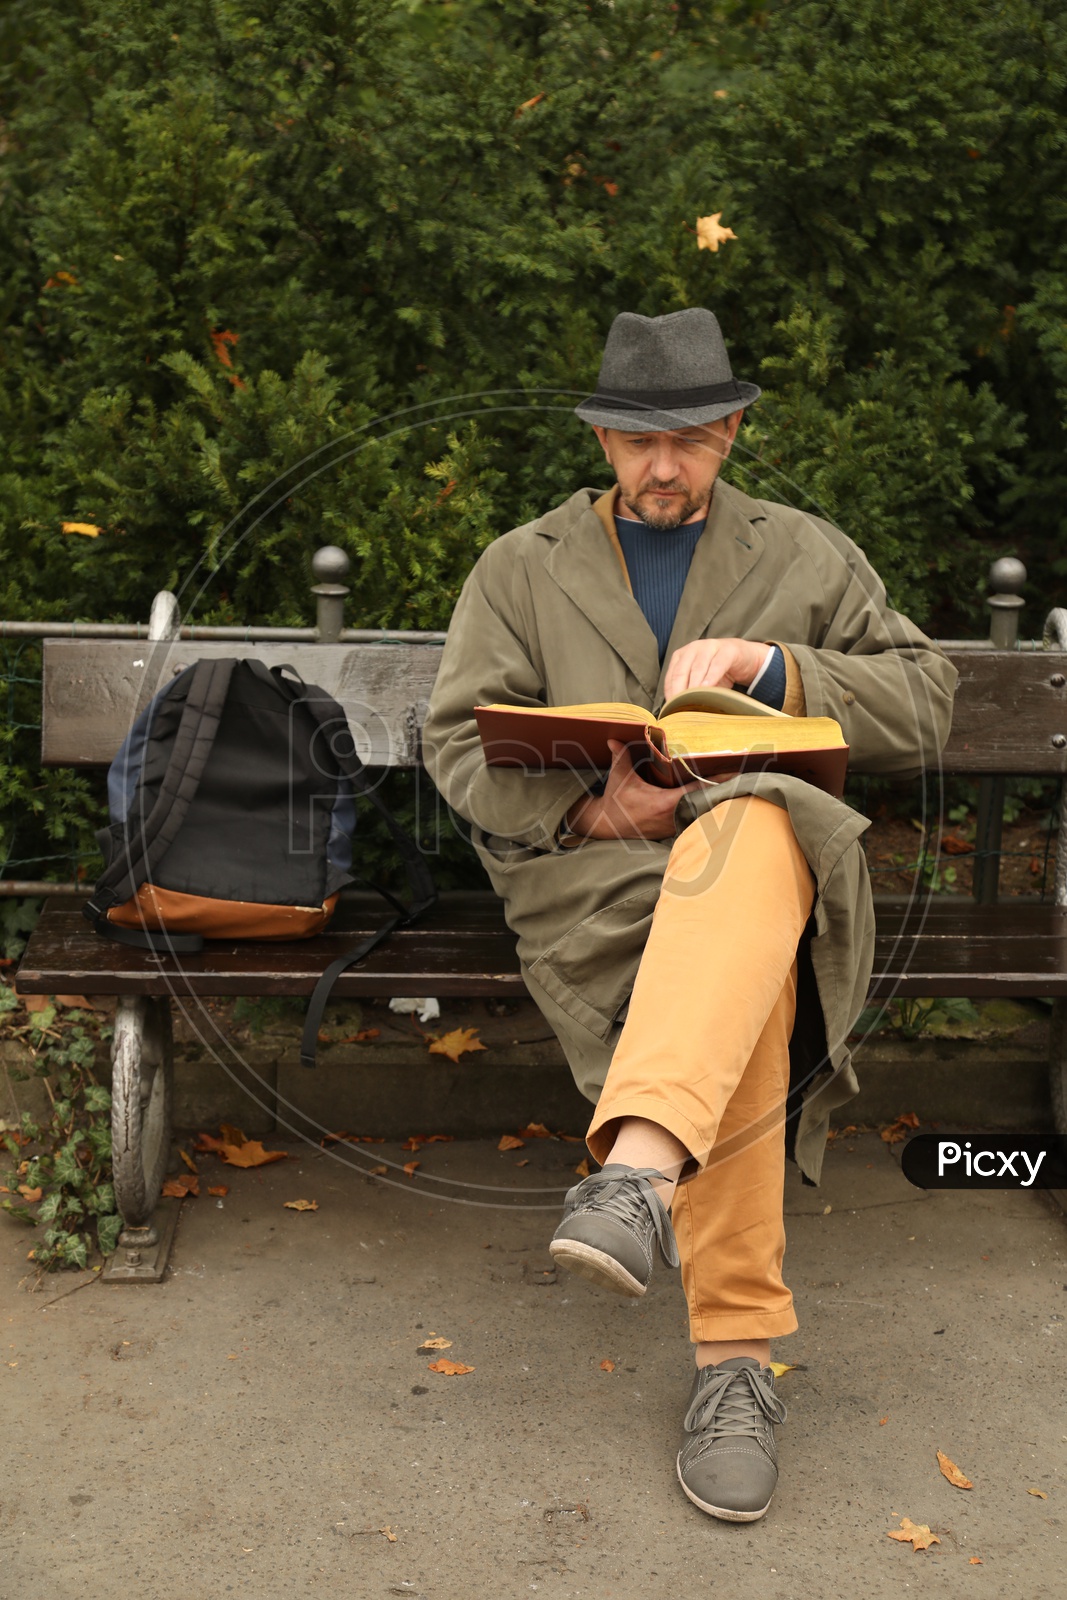 A man sitting on a bench and reading a book